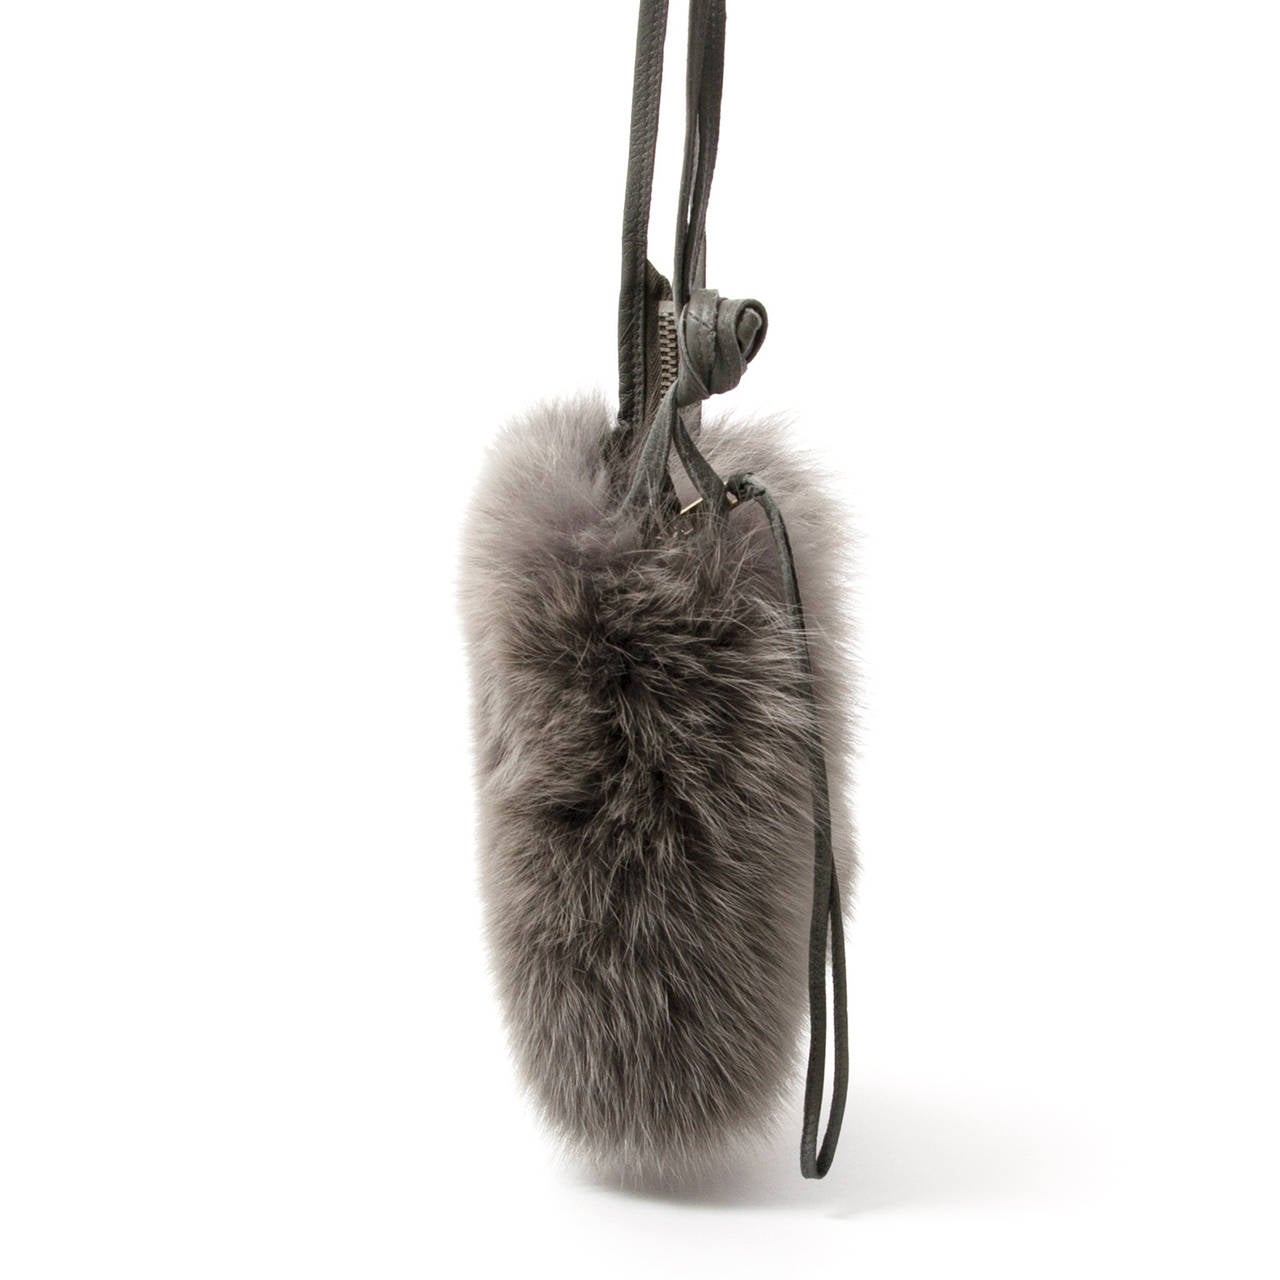 Small leather shoulder bag in grey fox fur.

Shoulder strap with two leather strands and top zip closure.